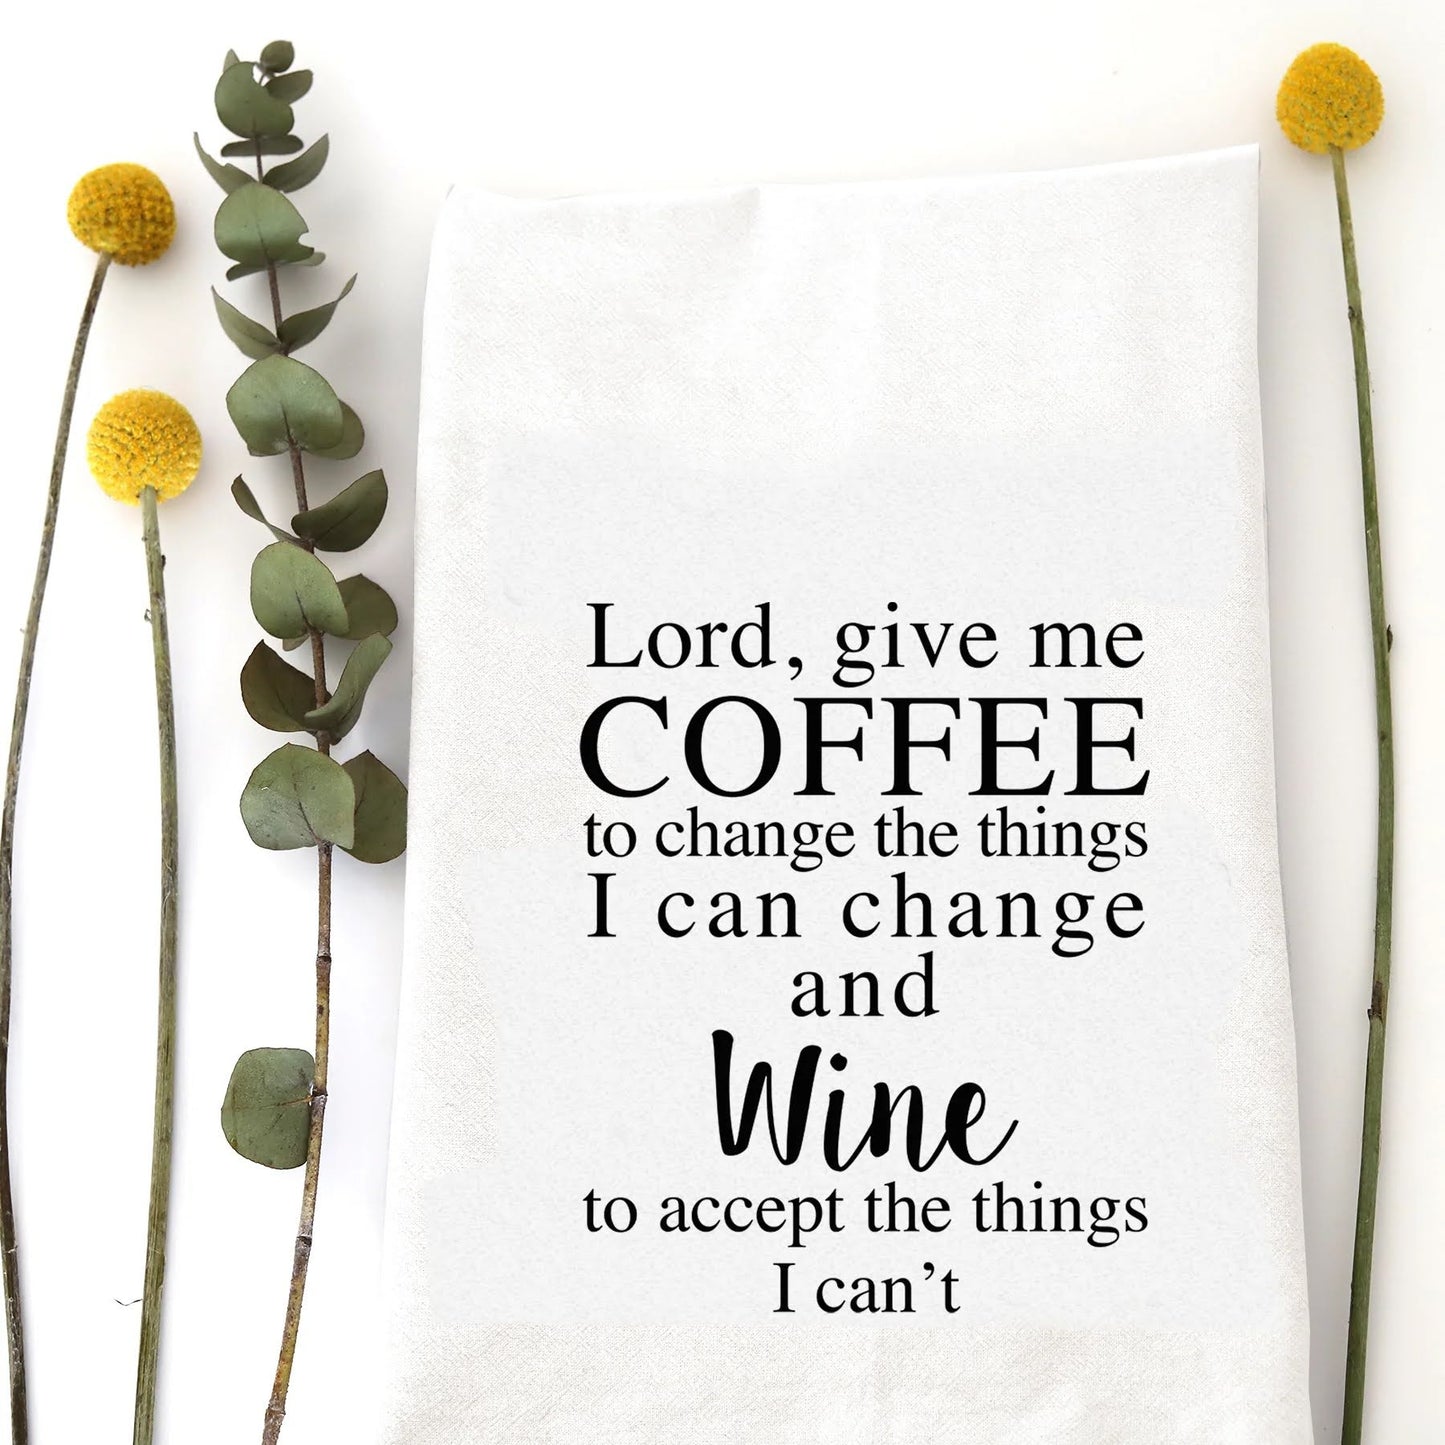 A tea towel with a funny saying - Lord, give me coffee to change the things I can change and wine to accept the things I can't.